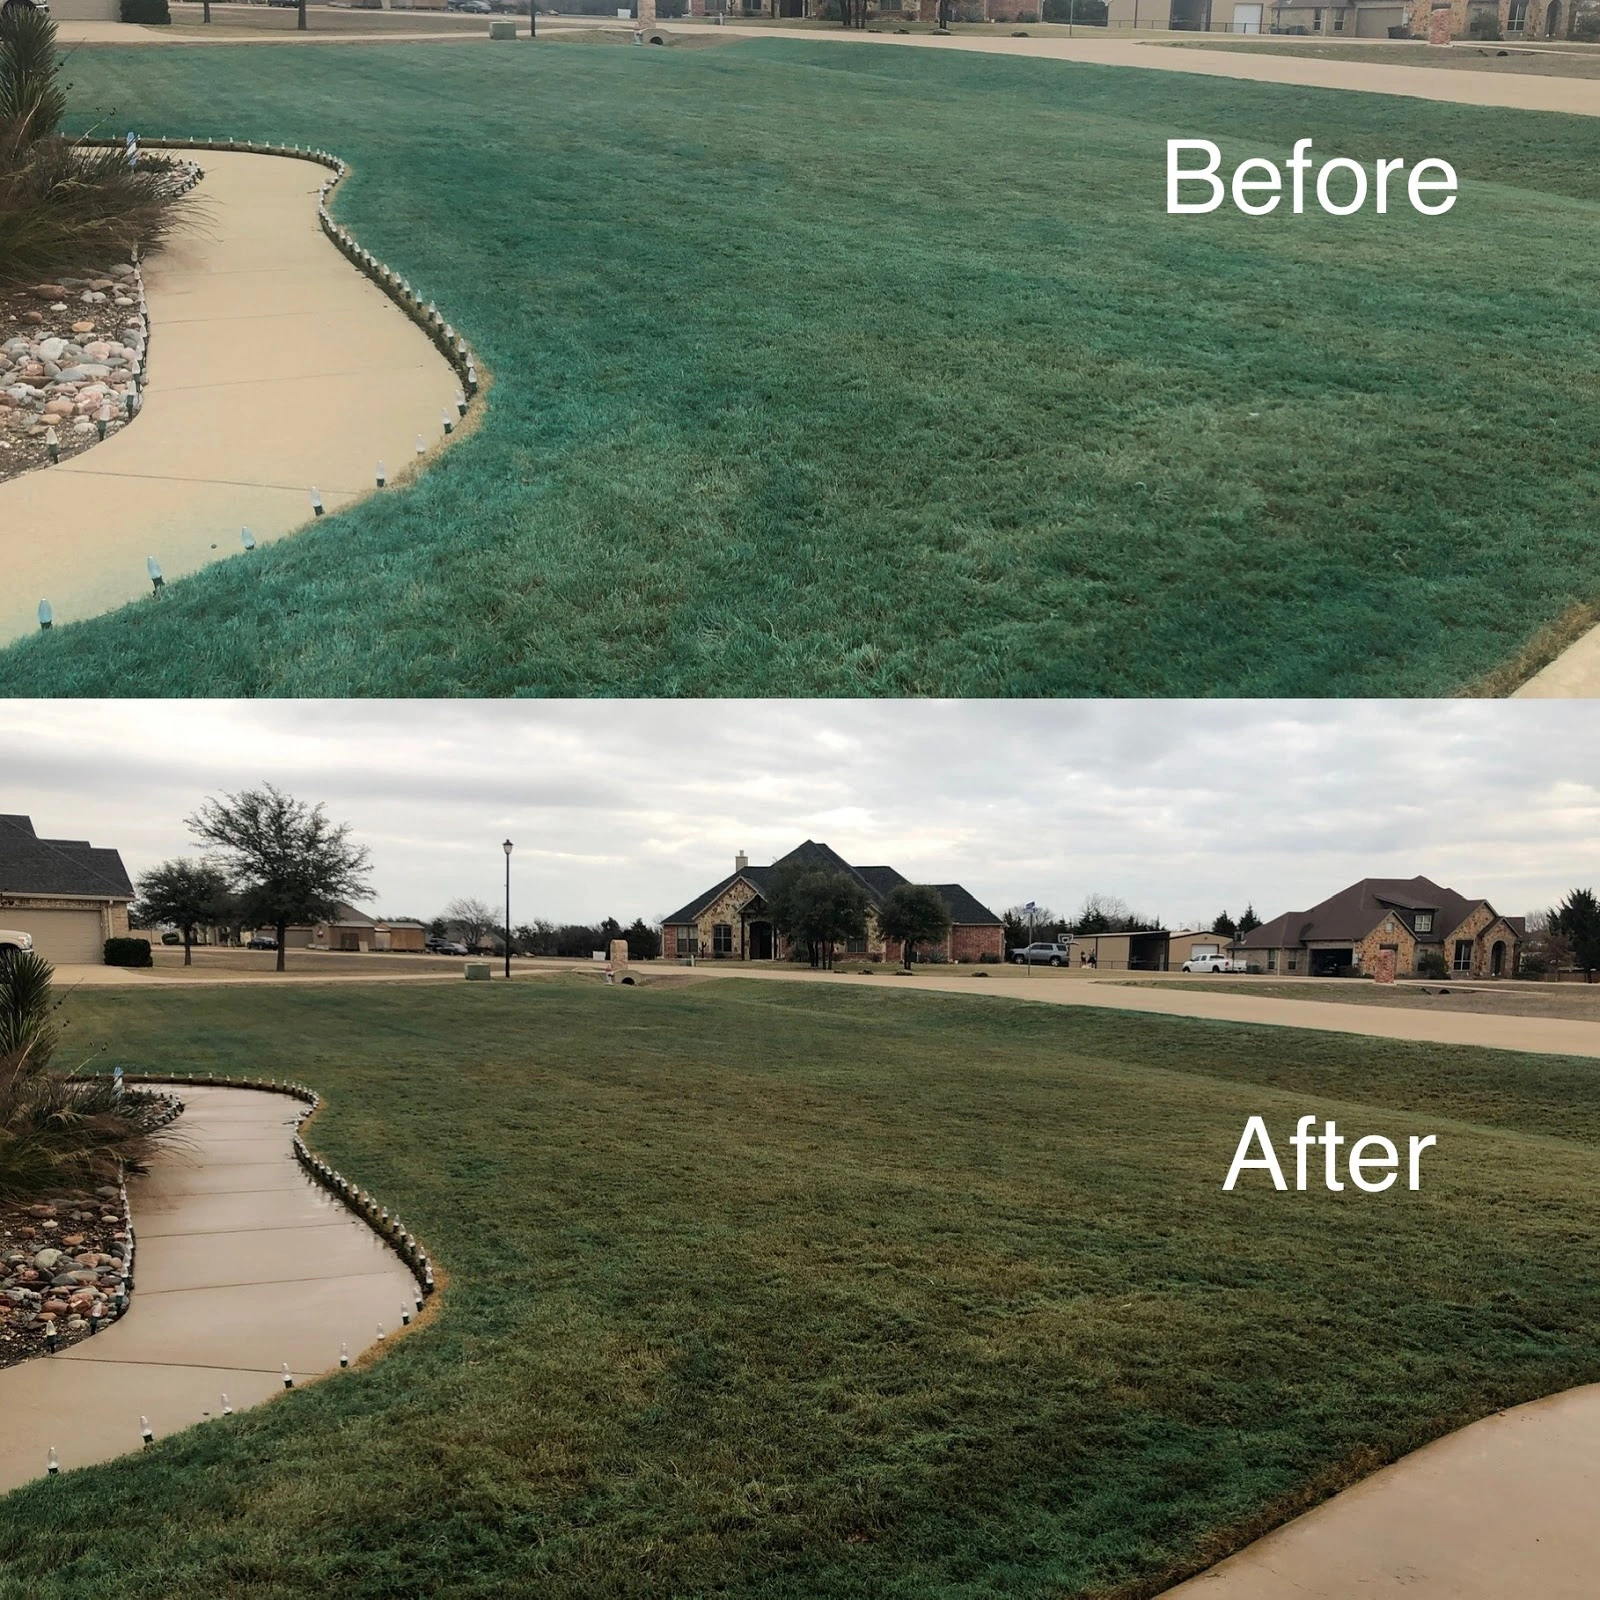 Why Are Lawns Turning Blue in North Texas?